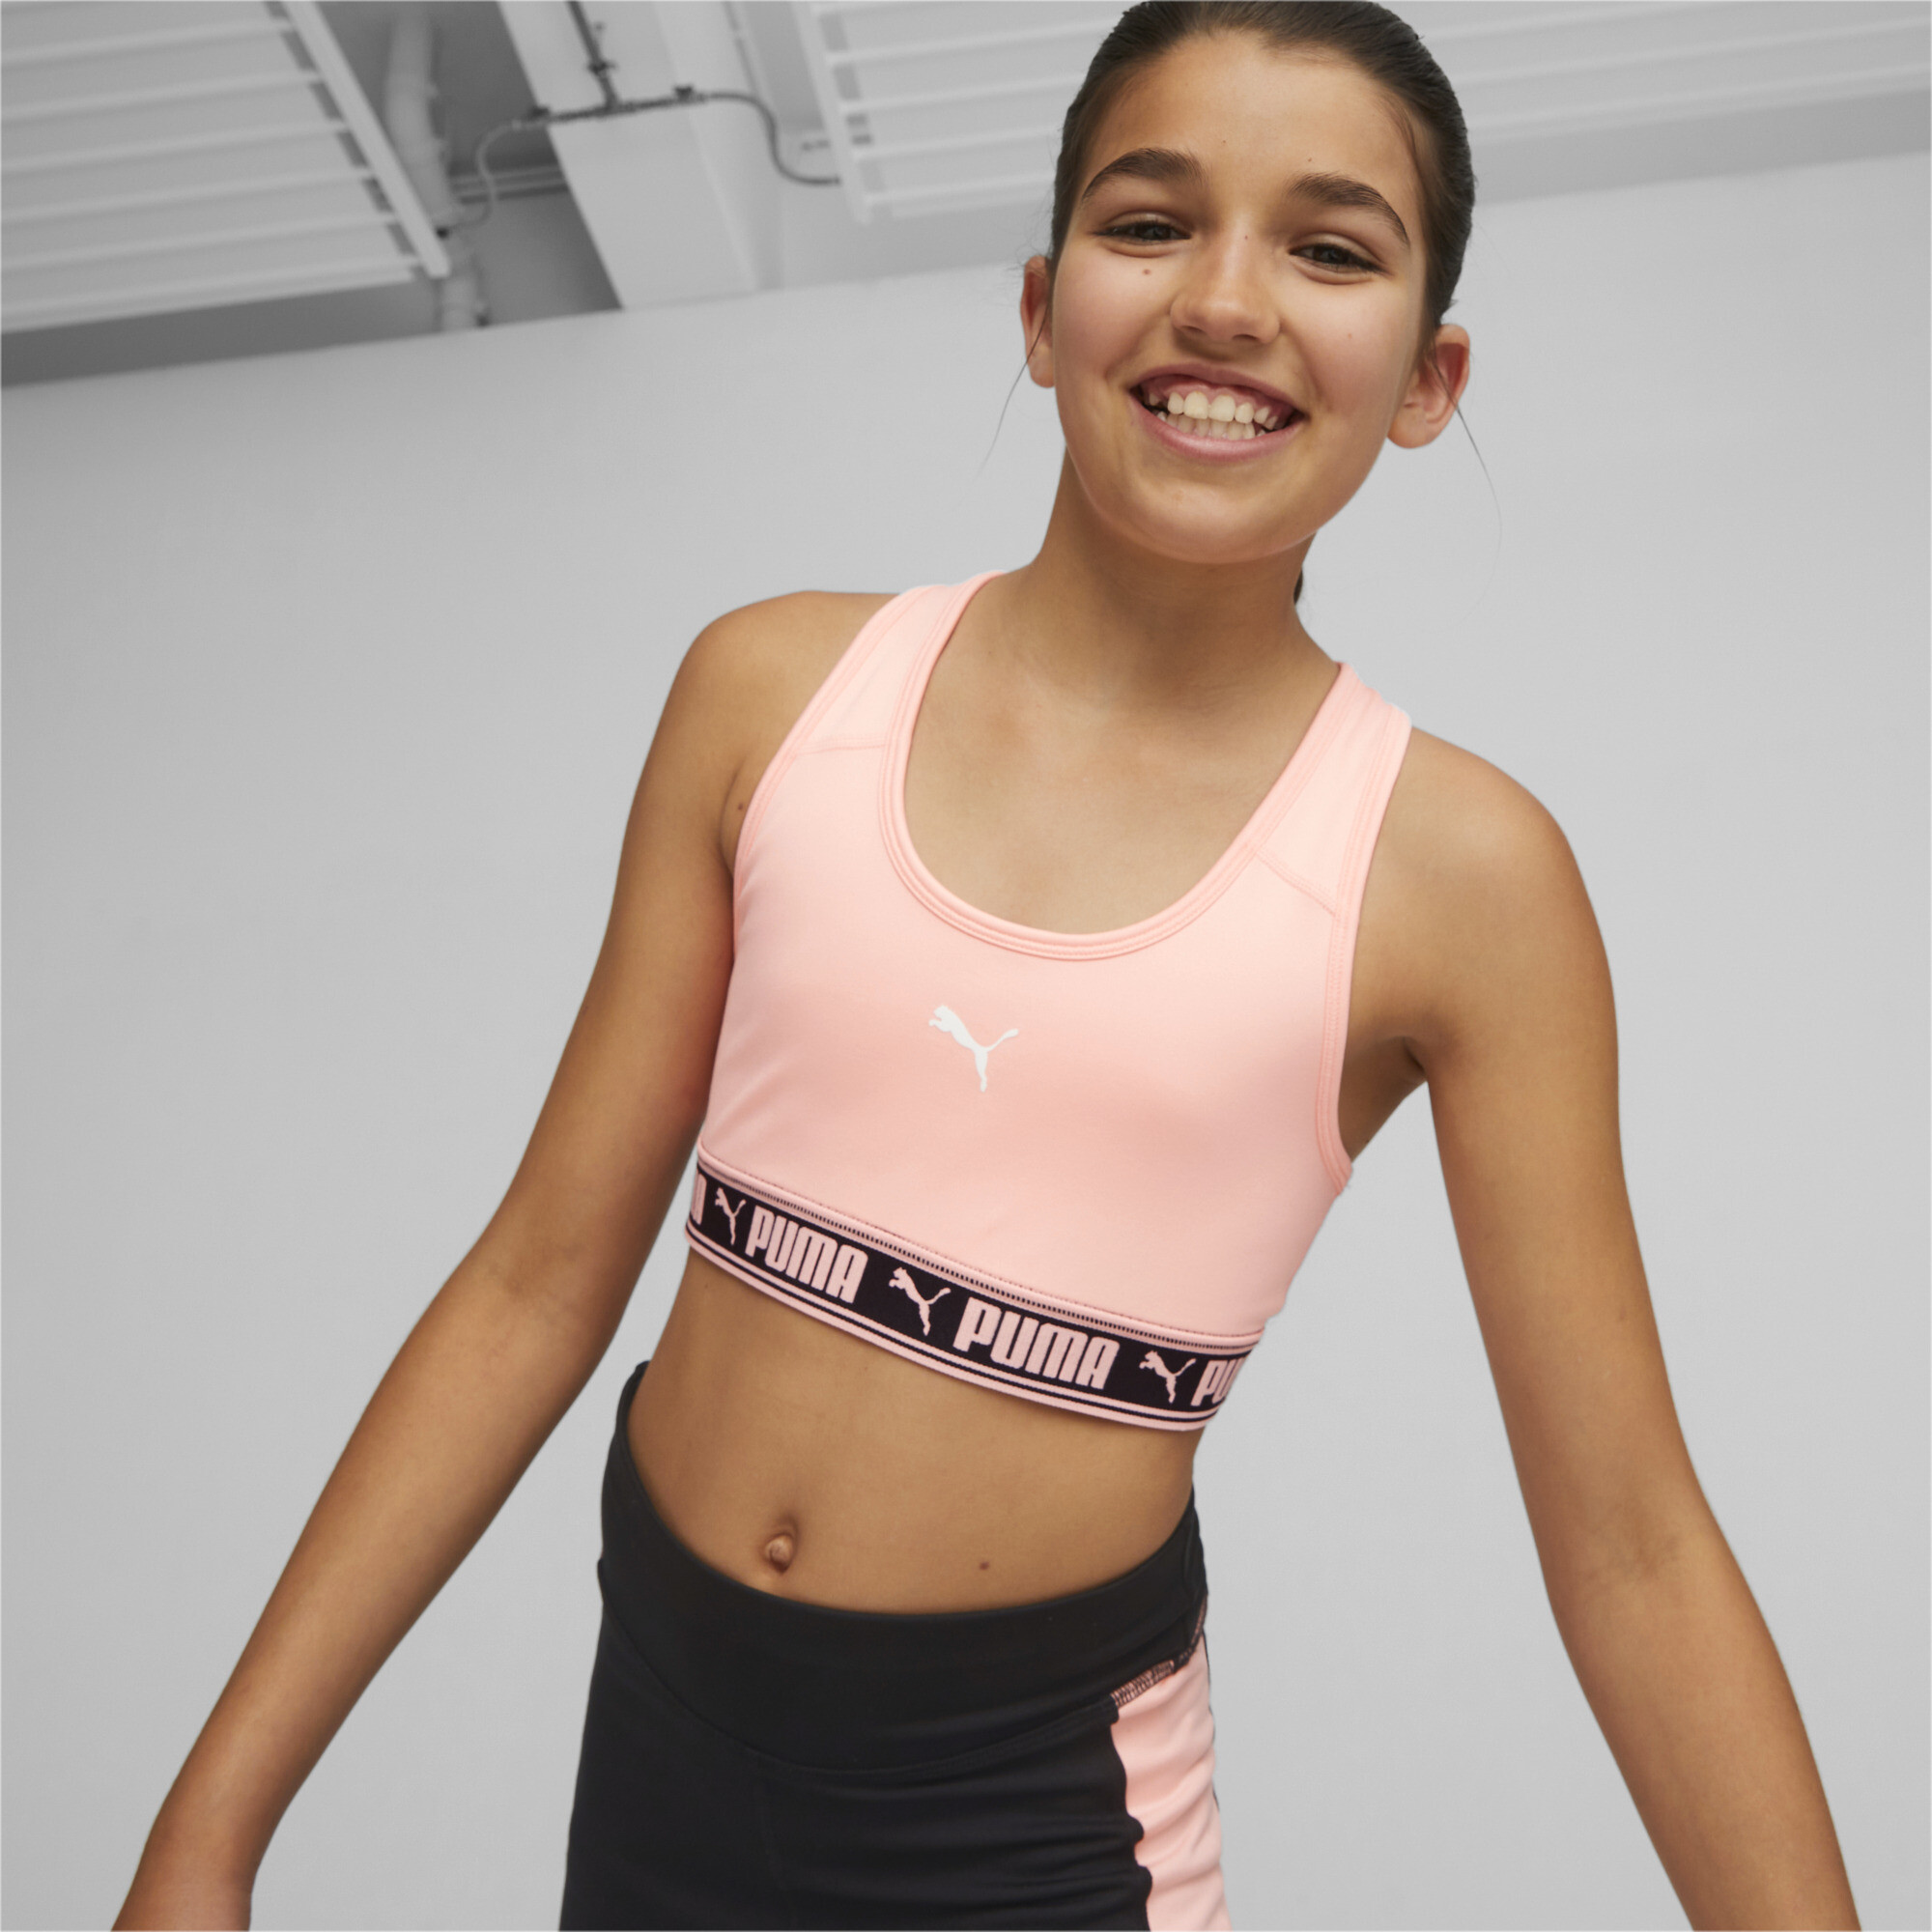 Women's Puma Strong Bra Youth, Pink, Size 7-8Y, Clothing